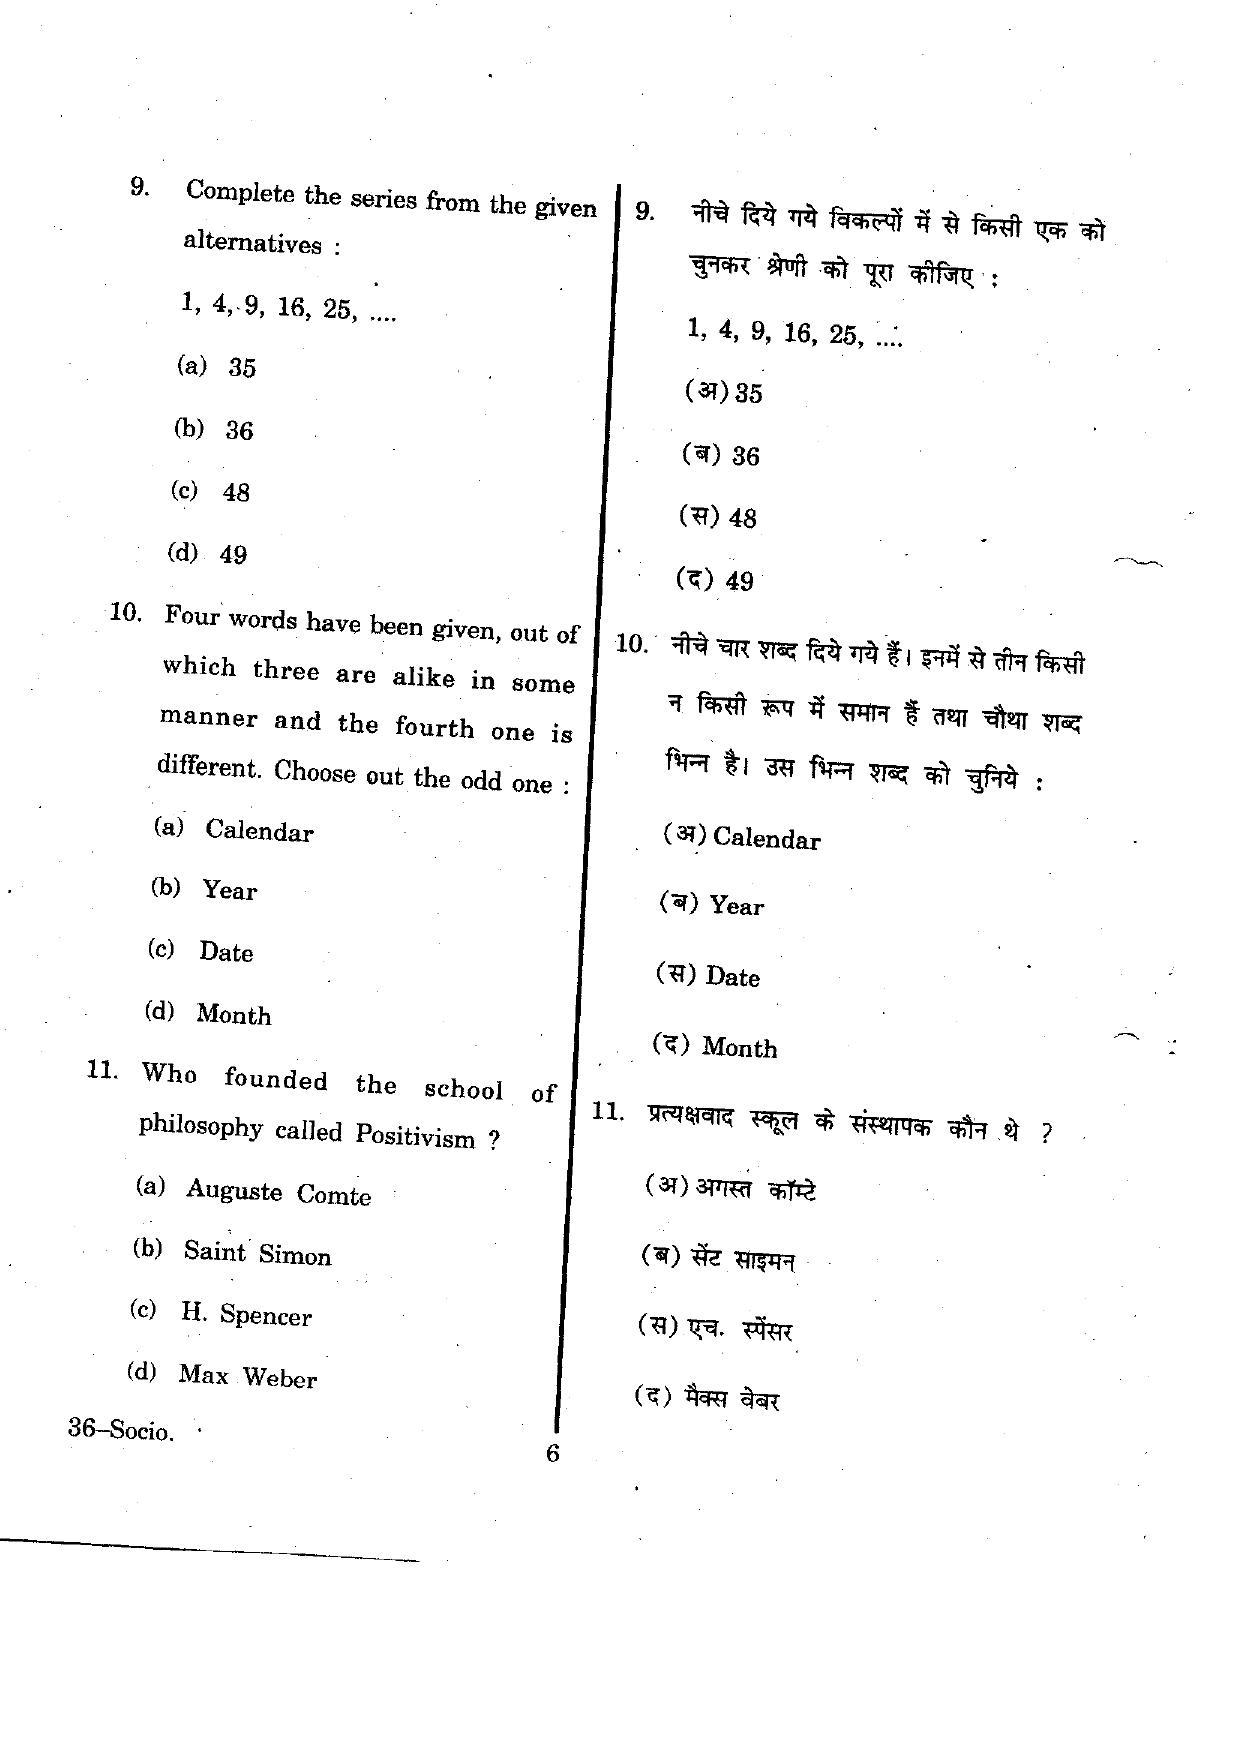 URATPG Sociology 2012 Question Paper - Page 6